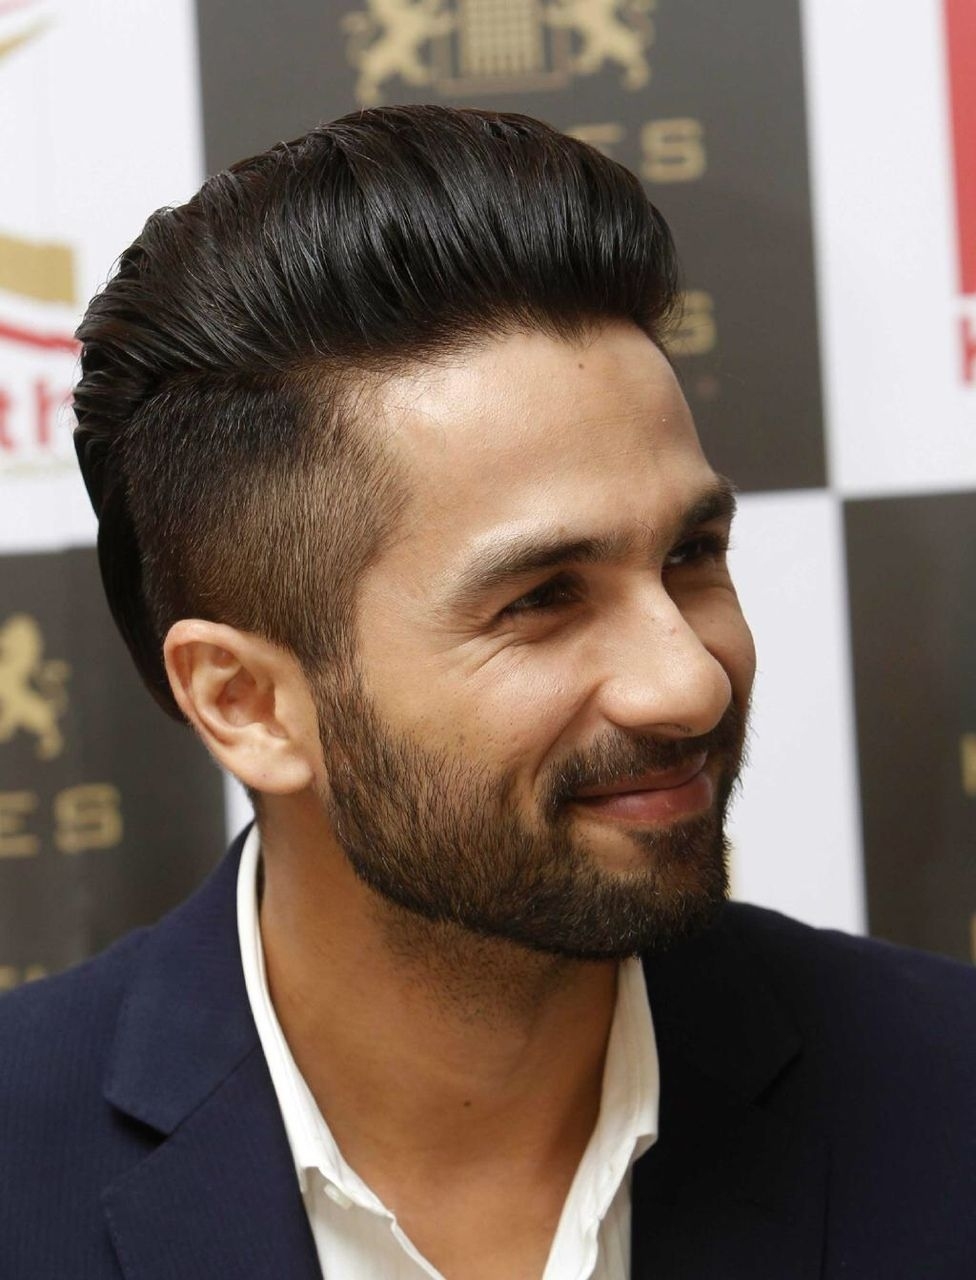 The World Of Indian Cinema | Hairstyle | Shahid Kapoor within Indian Celebrities Hairstyles Male